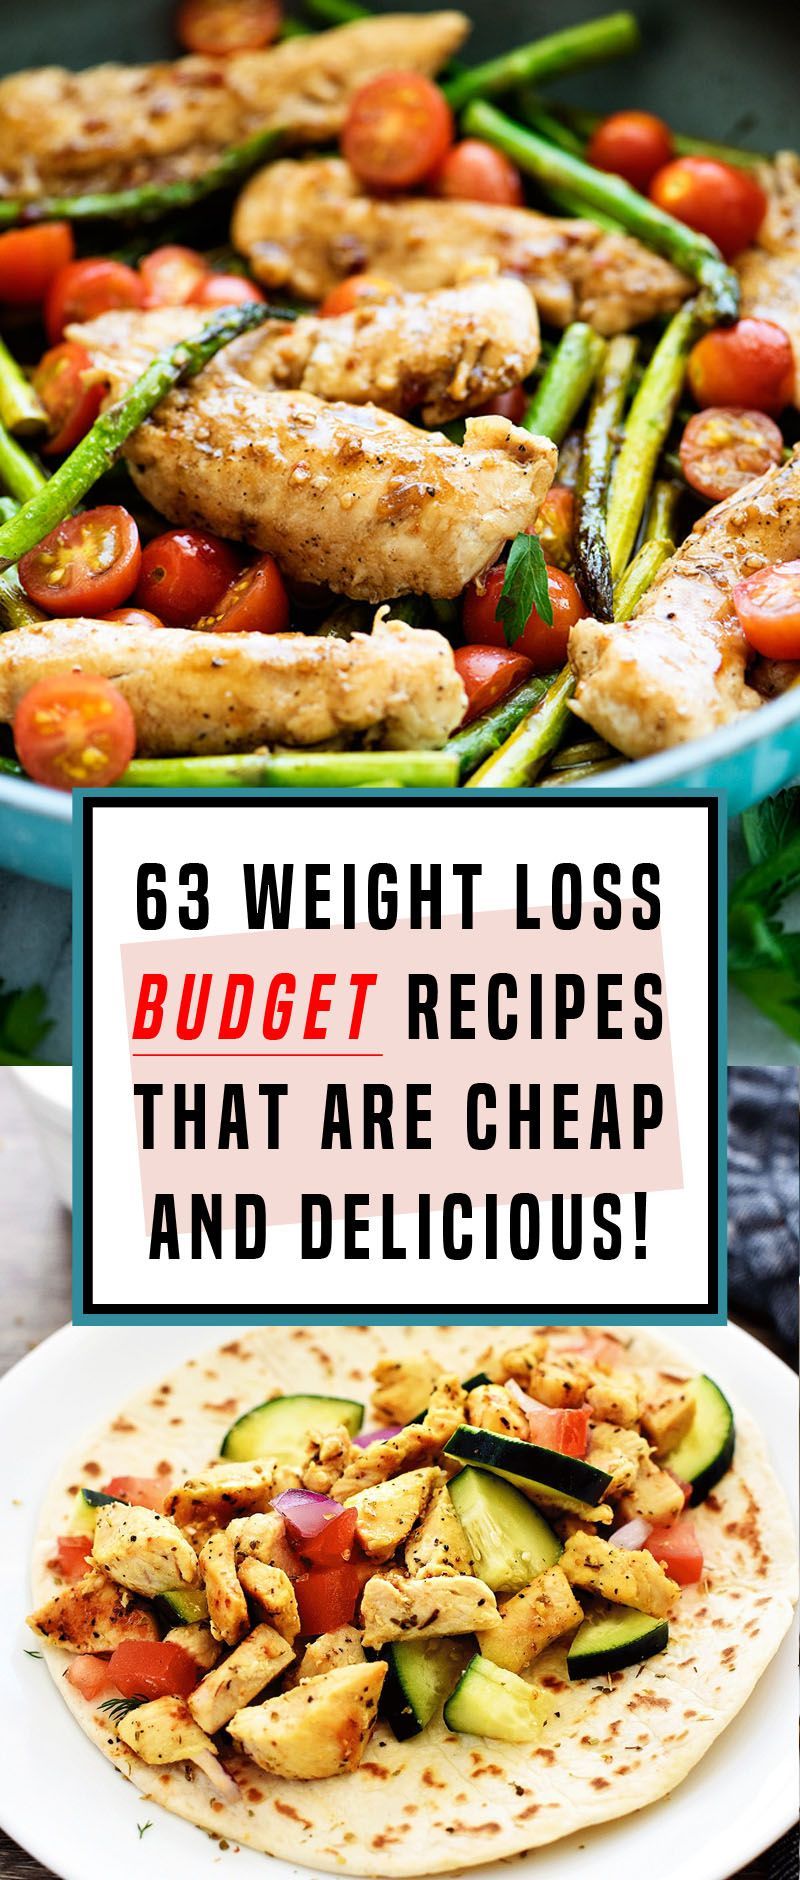 14 healthy recipes On A Budget weightloss
 ideas